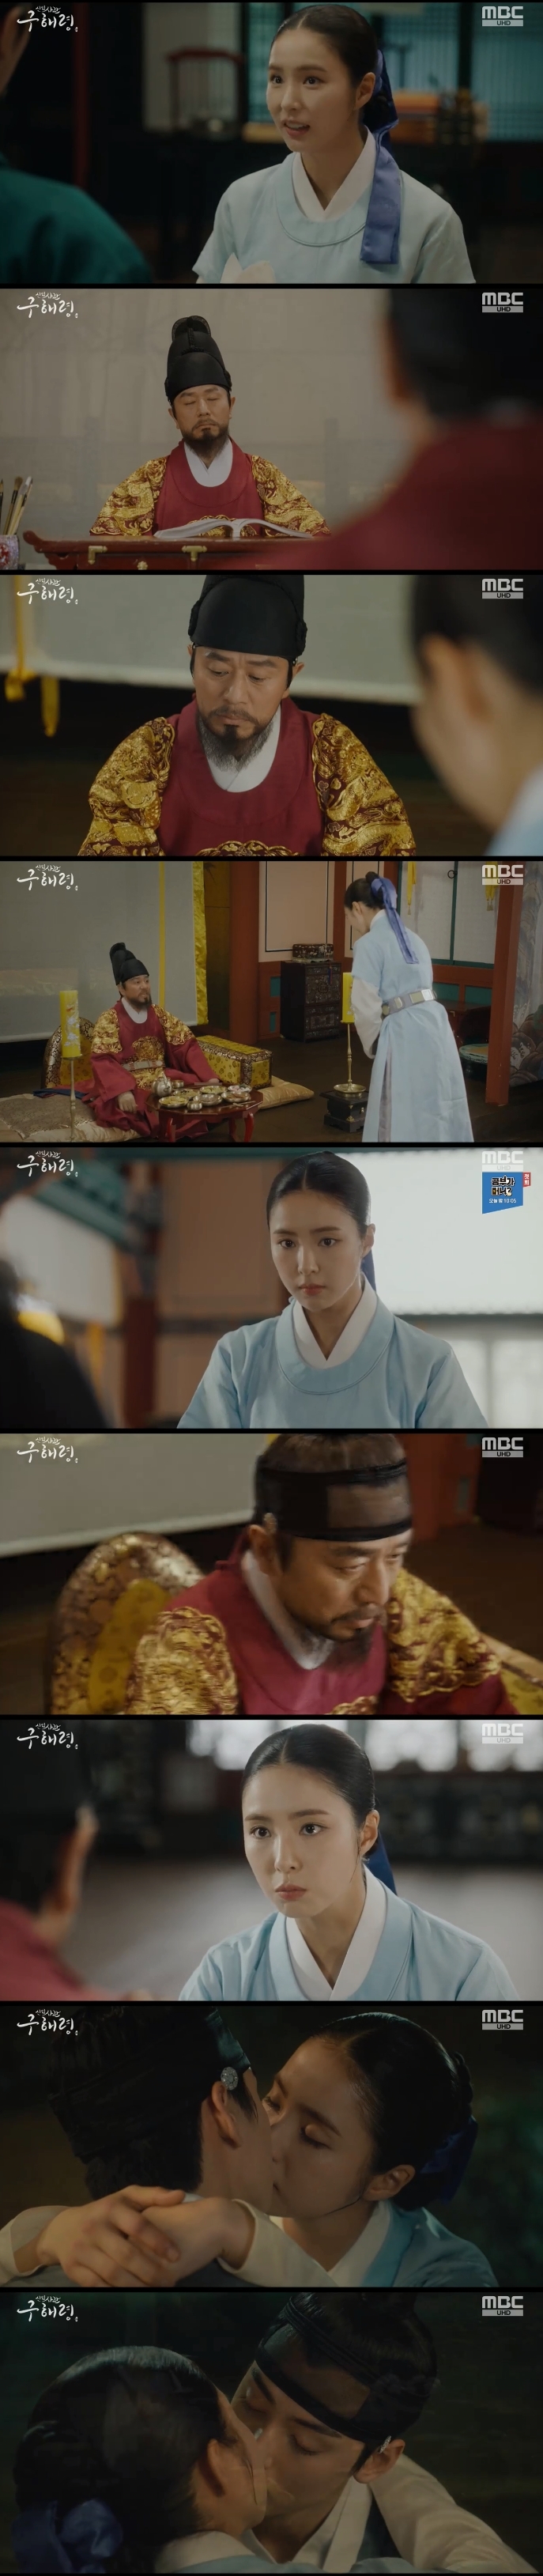 Shin Se-kyung, the first lady of the new officer Rookie Historian Goo Hae-ryung, was on the air.On the 22nd MBC tree drama The new officer Rookie Historian Goo Hae-ryung (playplayed by Kim Ho-soo / directed by Kang Il-soo, Han Hyun-hee), Rookie Historian Goo Hae-ryung, who conveys all the words to King Lee Tae (Kim Min-Sang), was portrayed.On this day, Cha Eun-woo was embarrassed and prepared for the preparations, because it was the first time in 20 years.Rookie Historian Goo Hae-ryung was also in the process of entering the room and headed for the preparations, and encountered Lee Lim and was puzzled by this situation.In addition, when I was greeted by Itae, the couple of the taxa, and the provincial council, Im (Kim Yeo-jin) also pointed out that he had not raised the text.Itae promised to raise the question before the same time every morning.The king also attended the contest.When the king heard about the six kings of the contest, he asked Irim for his opinion, and Irim replied, I think the King is three out of six.Lee pointed out that Lee Tae was confronted with the entrance of the officers, ordered Seung Jung Won to inspect the officers, and was angry at the entrance of the wife.The king, who heard this, said, The city is very honest because it resembles a fruitful person. It is like a great army of this country.Later, Lee Tae-tae said that he would see the affair for a while, and he gave a binary name to Rookie Historian Goo Hae-ryung to follow him all the time and write a book.Rookie Historian Goo Hae-ryung was plagued by hard work all day, embarrassed by the sudden kings orders.This was to deliberately pick up Rookie Historian Goo Hae-ryung.Rookie Historian Goo Hae-ryung had to write down all the ingredients of the kings table, even to see the toilet and to clean up the toilet.Rookie Historian Goo Hae-ryung poured out his anger at the officers of the presbytery after finishing the day, saying, It is a torture.On the night, Min Woo-won (Lee Ji-hoon) wiped his hand by handing an apology to Rookie Historian Goo Hae-ryung, who had suffered from his own troubles.To such a Min Woo-won, Rookie Historian Goo Hae-ryung said the reason for the kings harassment would not be due to the precept.Rookie Historian Goo Hae-ryung then moved busily along with it.Rookie Historian Goo Hae-ryung was not tired of Lee Taes operation, but pursued the kings actions with a cheerful appearance.In addition, he did not eat the alcohol recommended by the king and said everything.Eventually, the king ordered Rookie Historian Goo Hae-ryung to erase it without saying anything because he would not ask what he wrote down.When he said he would listen to whatever he wanted, Rookie Historian Goo Hae-ryung replied, I will really listen to whatever I want.Rookie Historian Goo Hae-ryung then confessed that he had never written anything in his book in the first place.In the meantime, he saw the appearance of a good king as a military officer, and he impressed Lee by revealing his belief that he would write his good figure in his remorse.In addition, Rookie Historian Goo Hae-ryung said, Your Grace, please do not hate the officer too much.The officer is not the only one who writes down the fault of the king, he said. I dare ask you, do not stay away from the officer.After that, Itae finally gave the officers the authority to enter without permission. The officers cheered on the performance of Rookie Historian Goo Hae-ryung.On the other hand, Rookie Historian Goo Hae-ryung, who was at the end of the broadcast, gave a kiss to Lee Rim who came to him first, and romance was on the rise.=